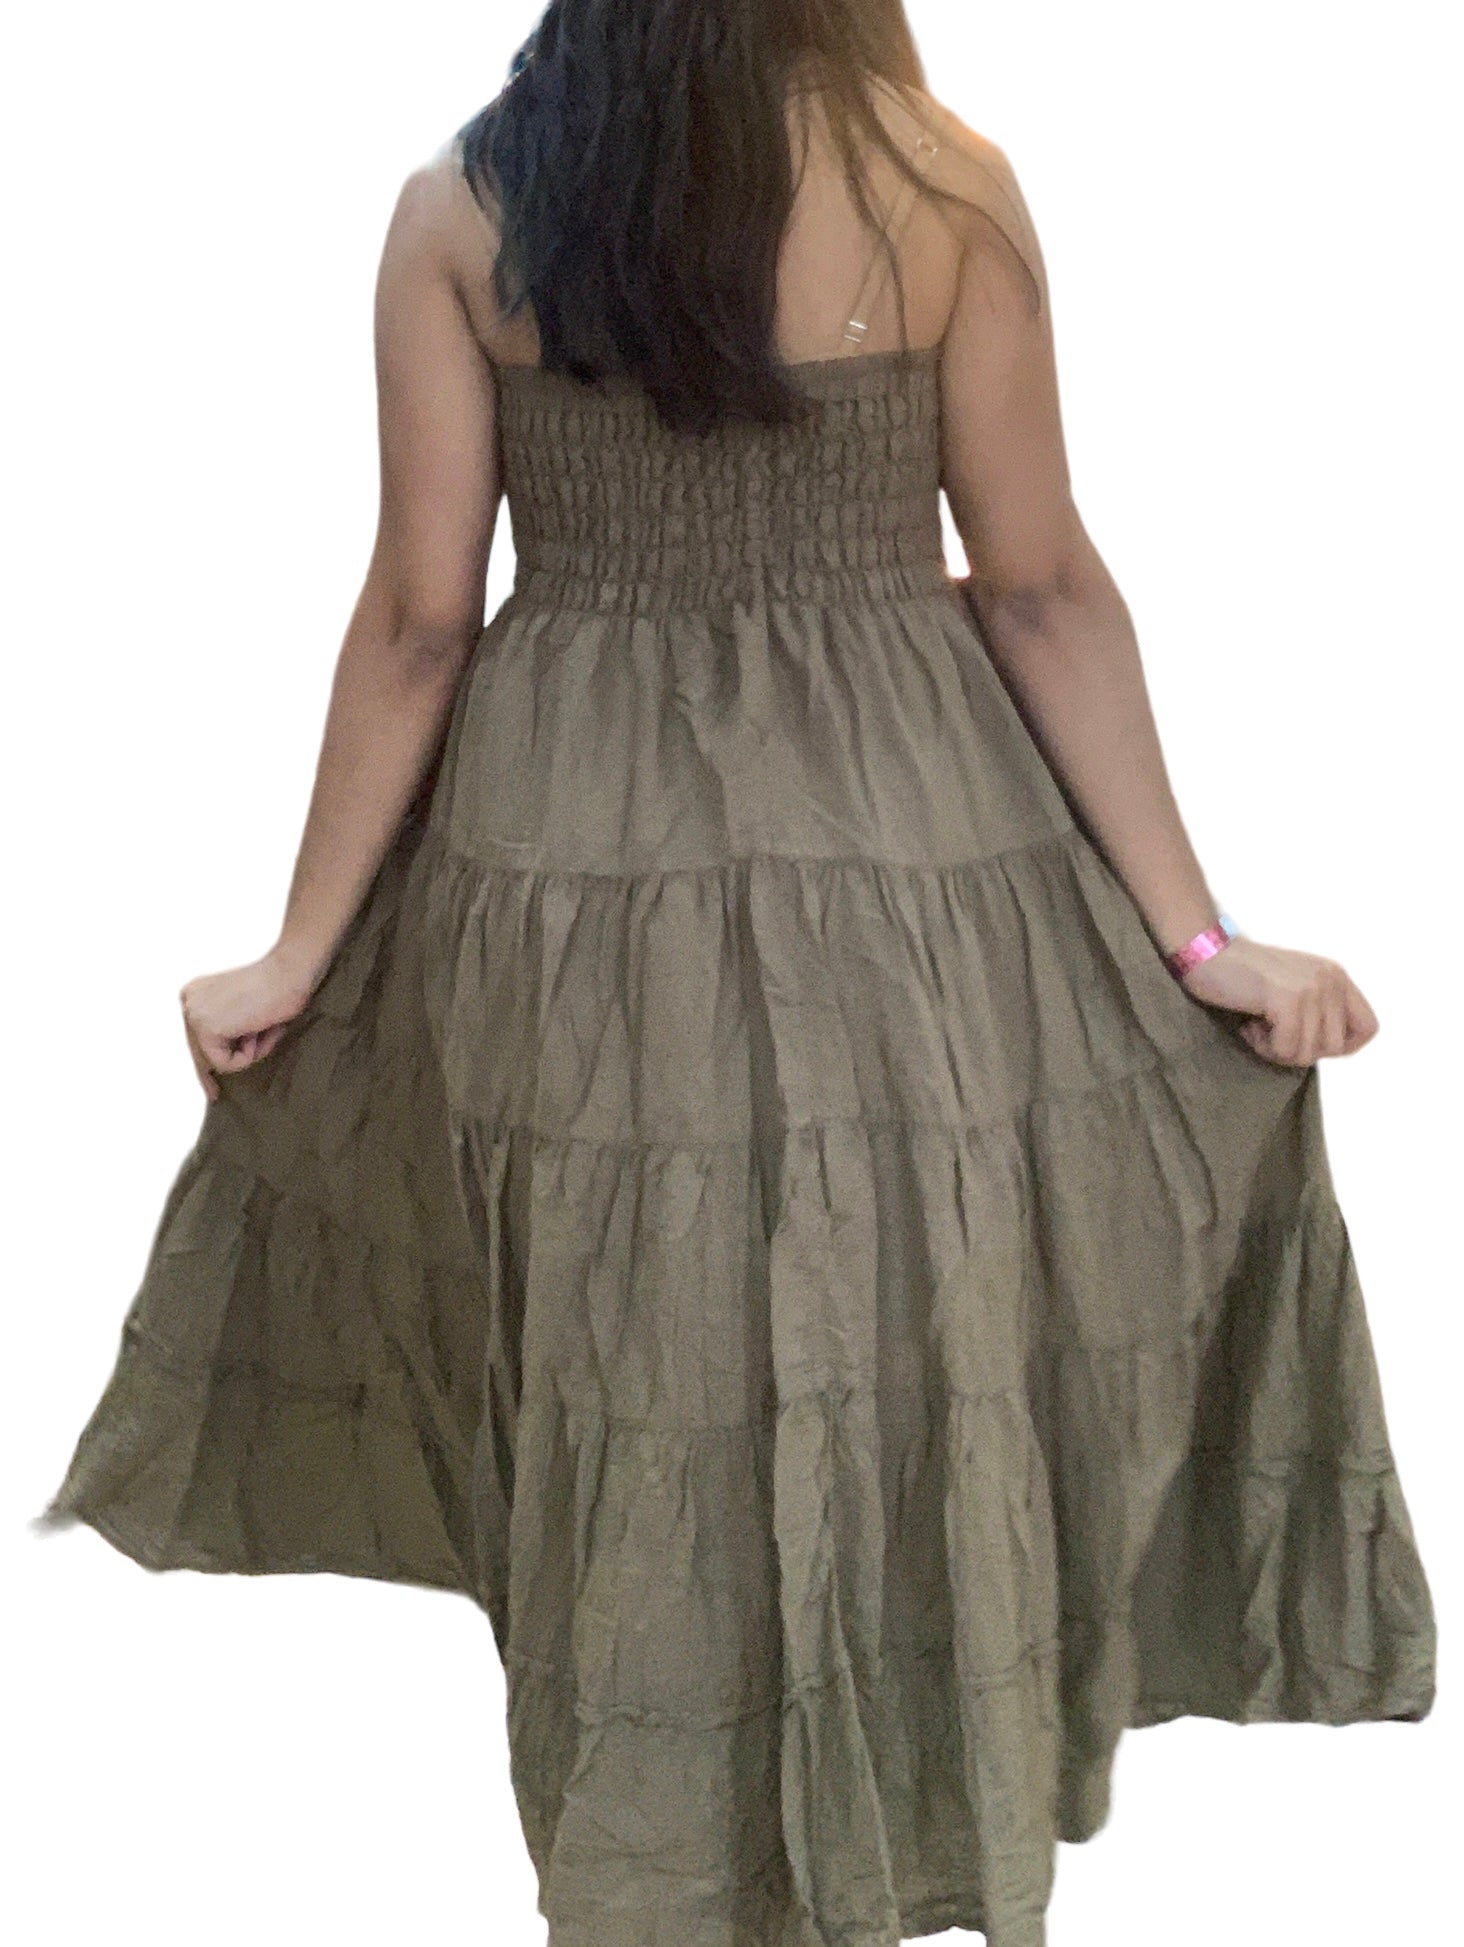 Tan Cotton Voile Tiered Skirt